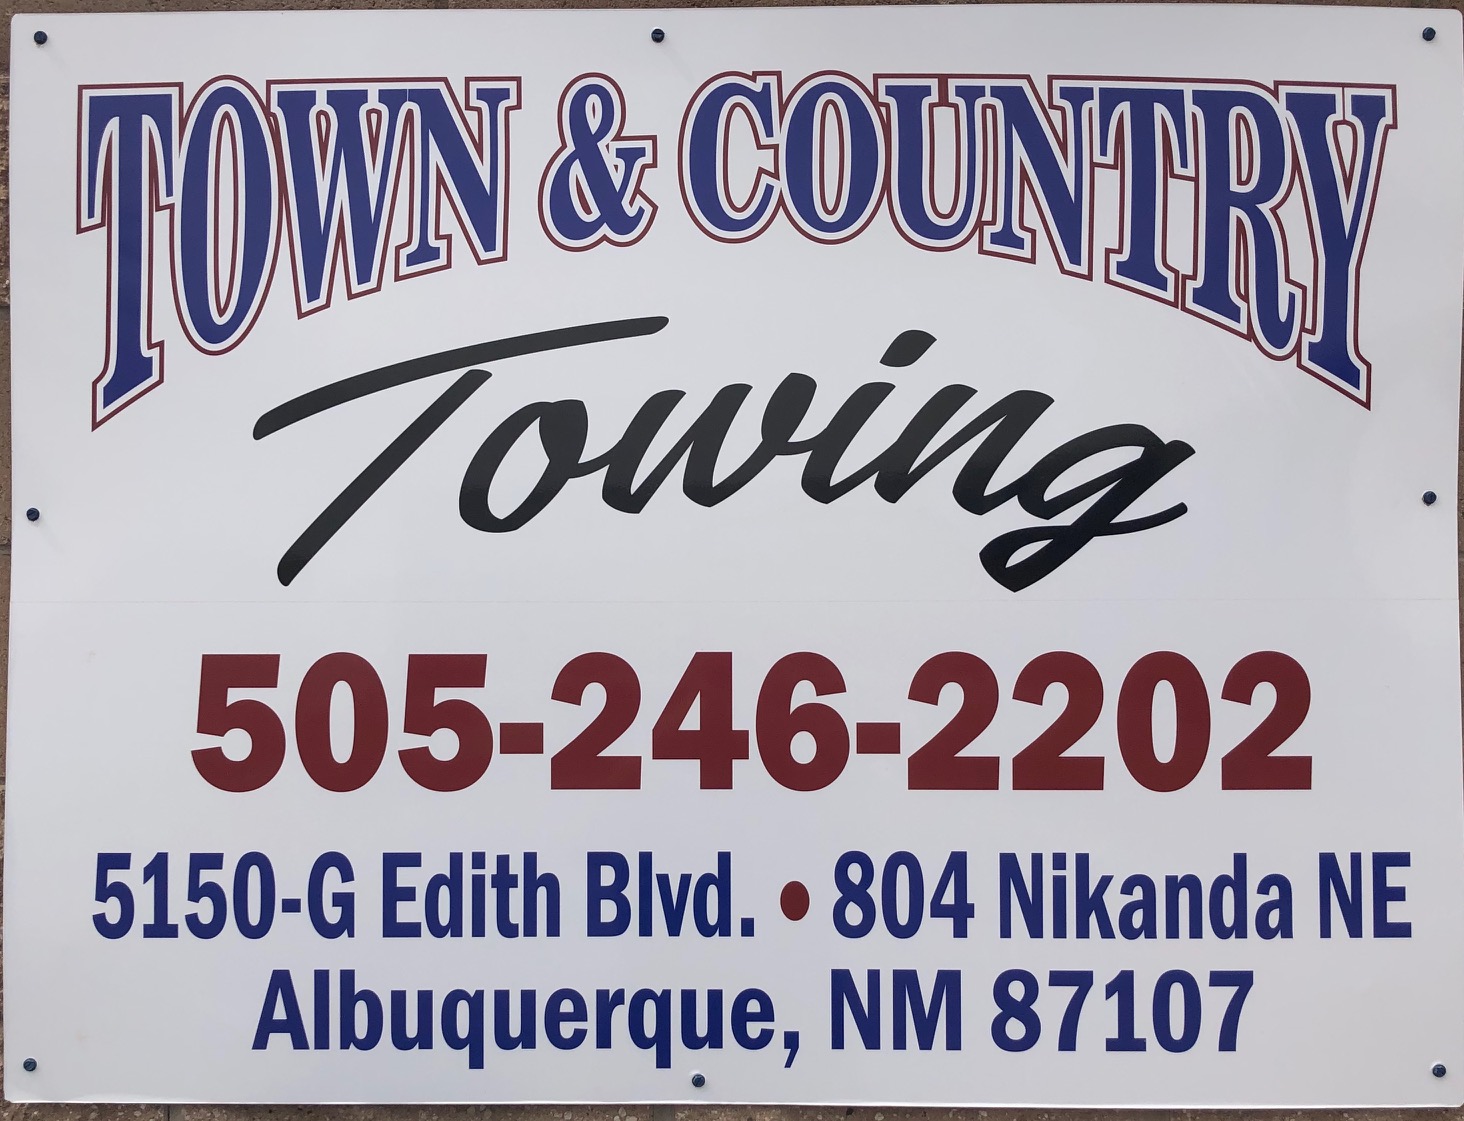 Town & Country Towing